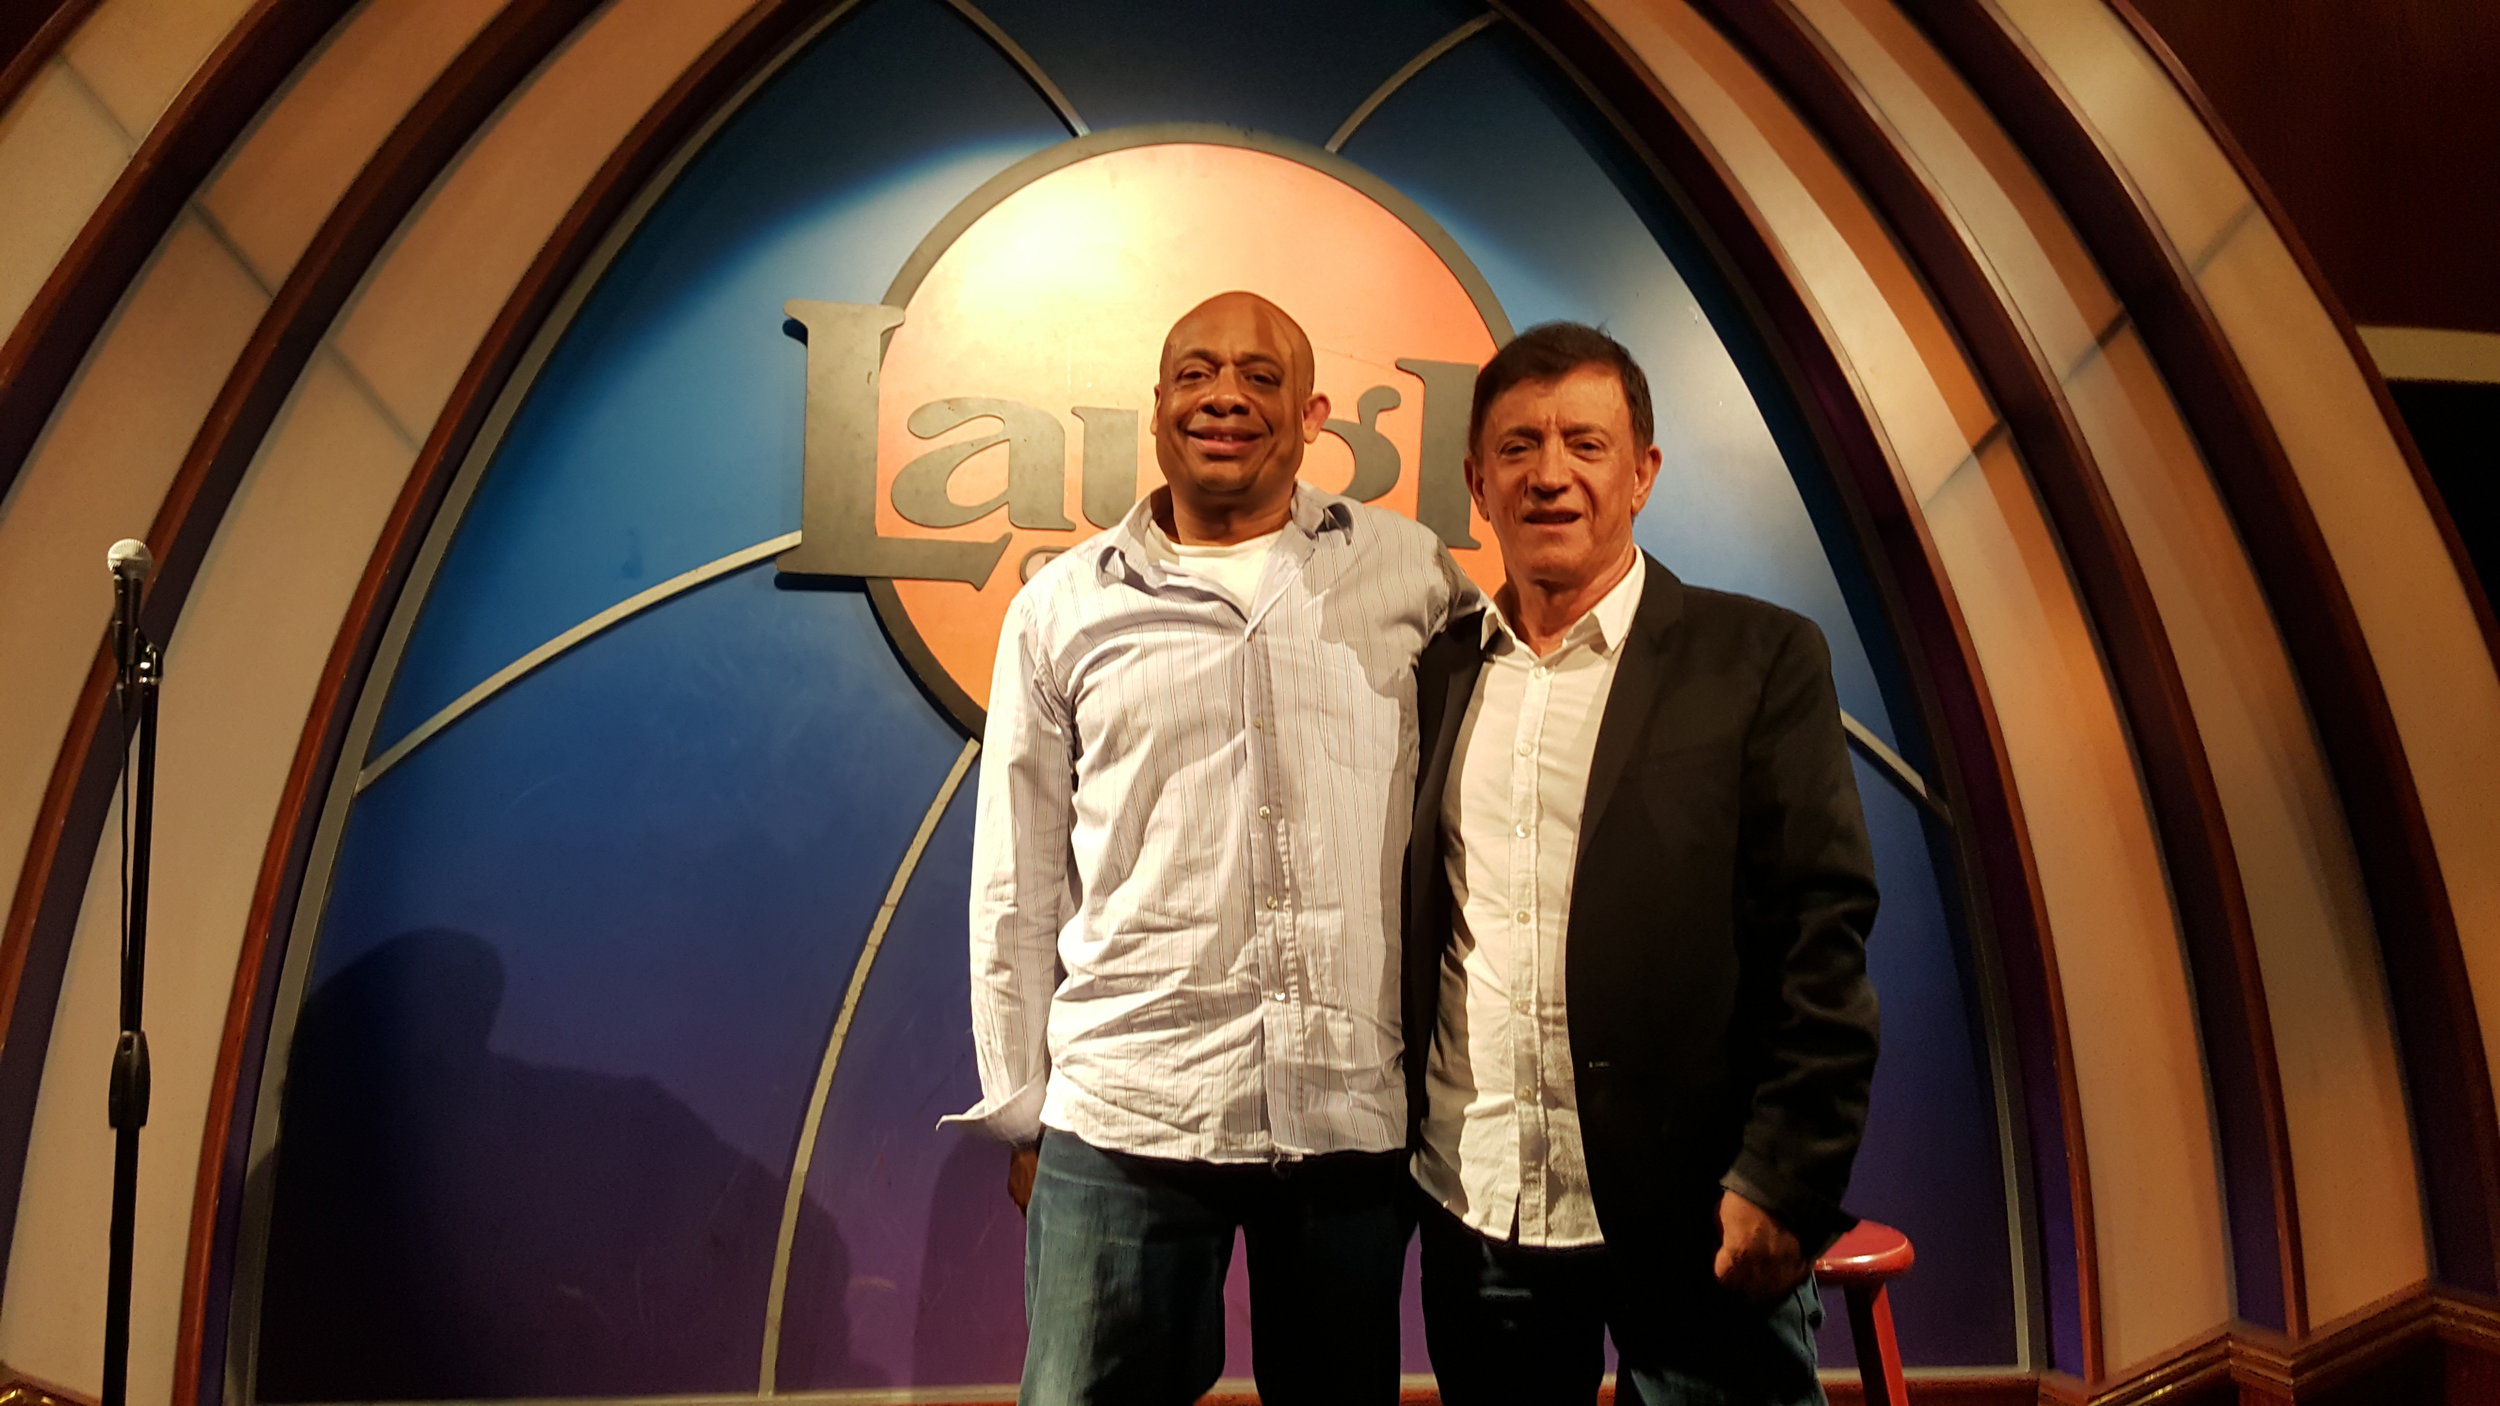 Michael and Jamie Masada founder of The Laugh Factory.jpg